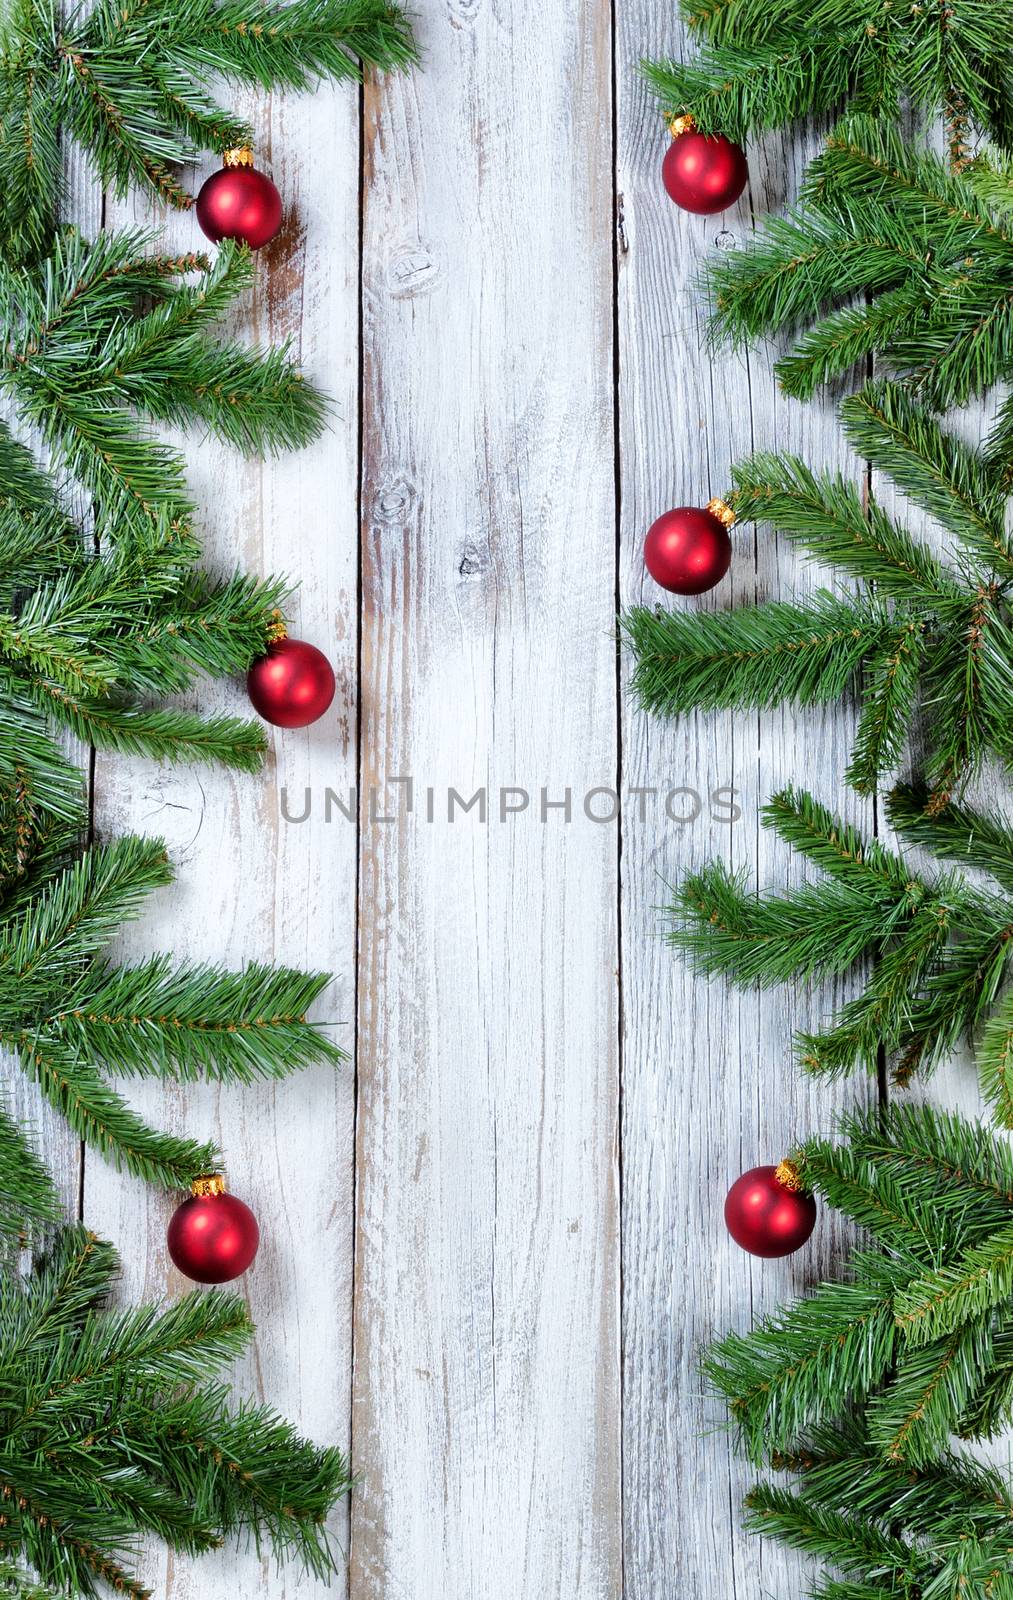 Vertical borders of Christmas red ornaments hanging in evergreen by tab1962